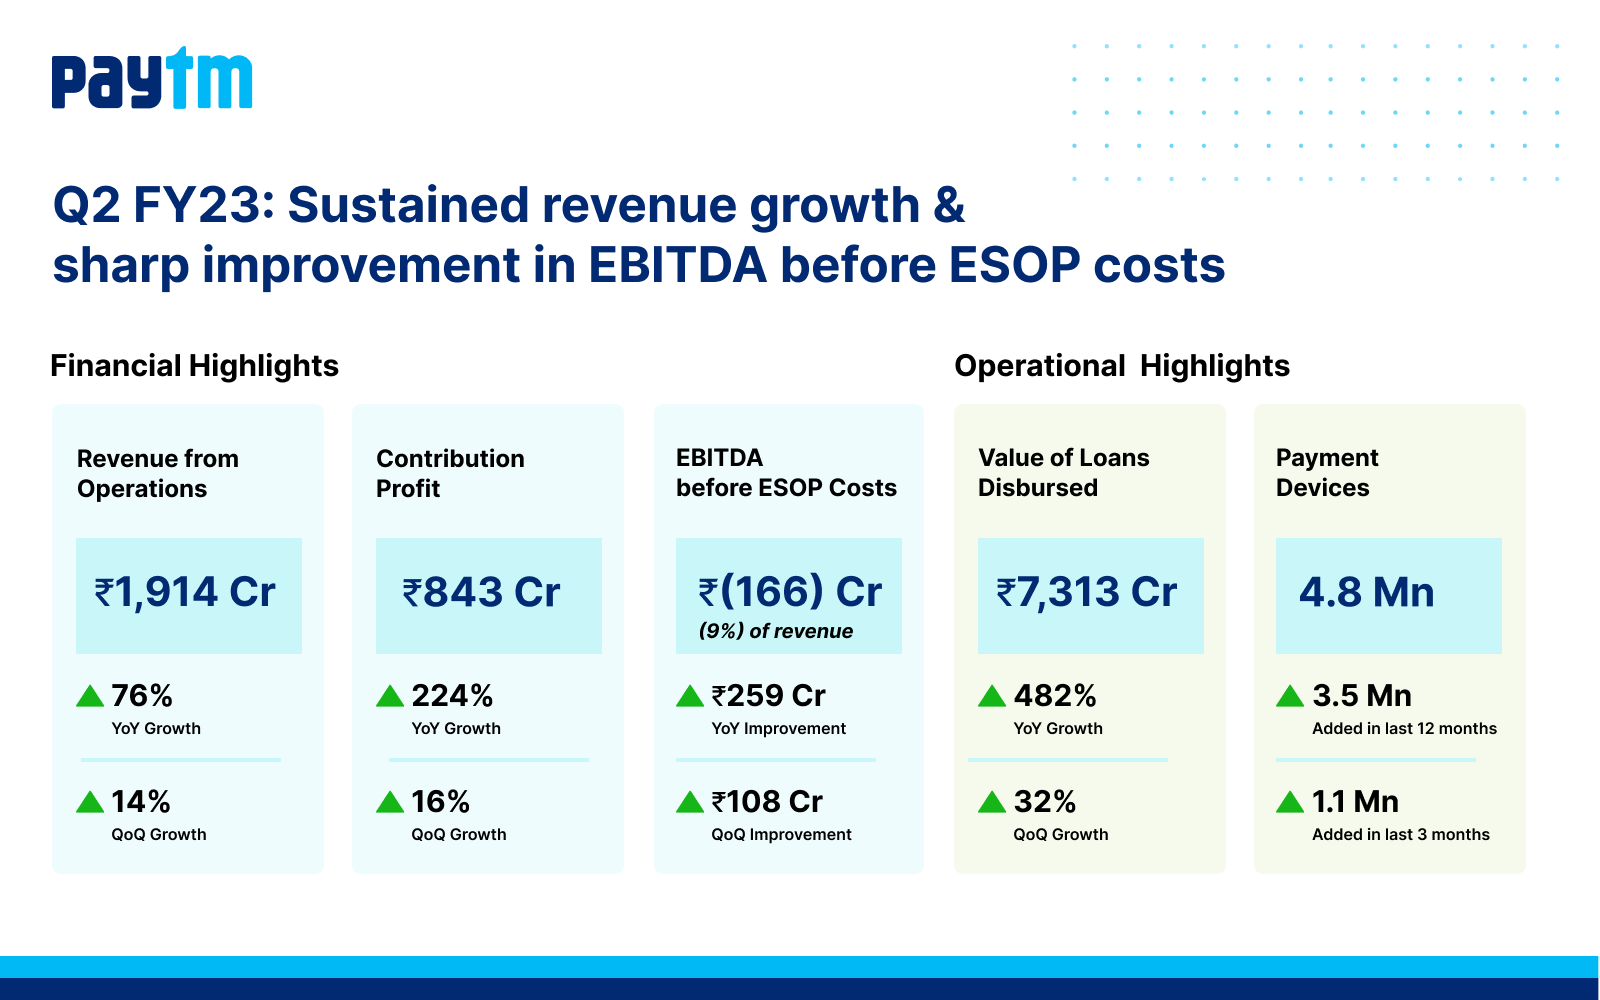 Paytm Q2FY23 Results Sustained Revenue Growth with Sharp Improvement